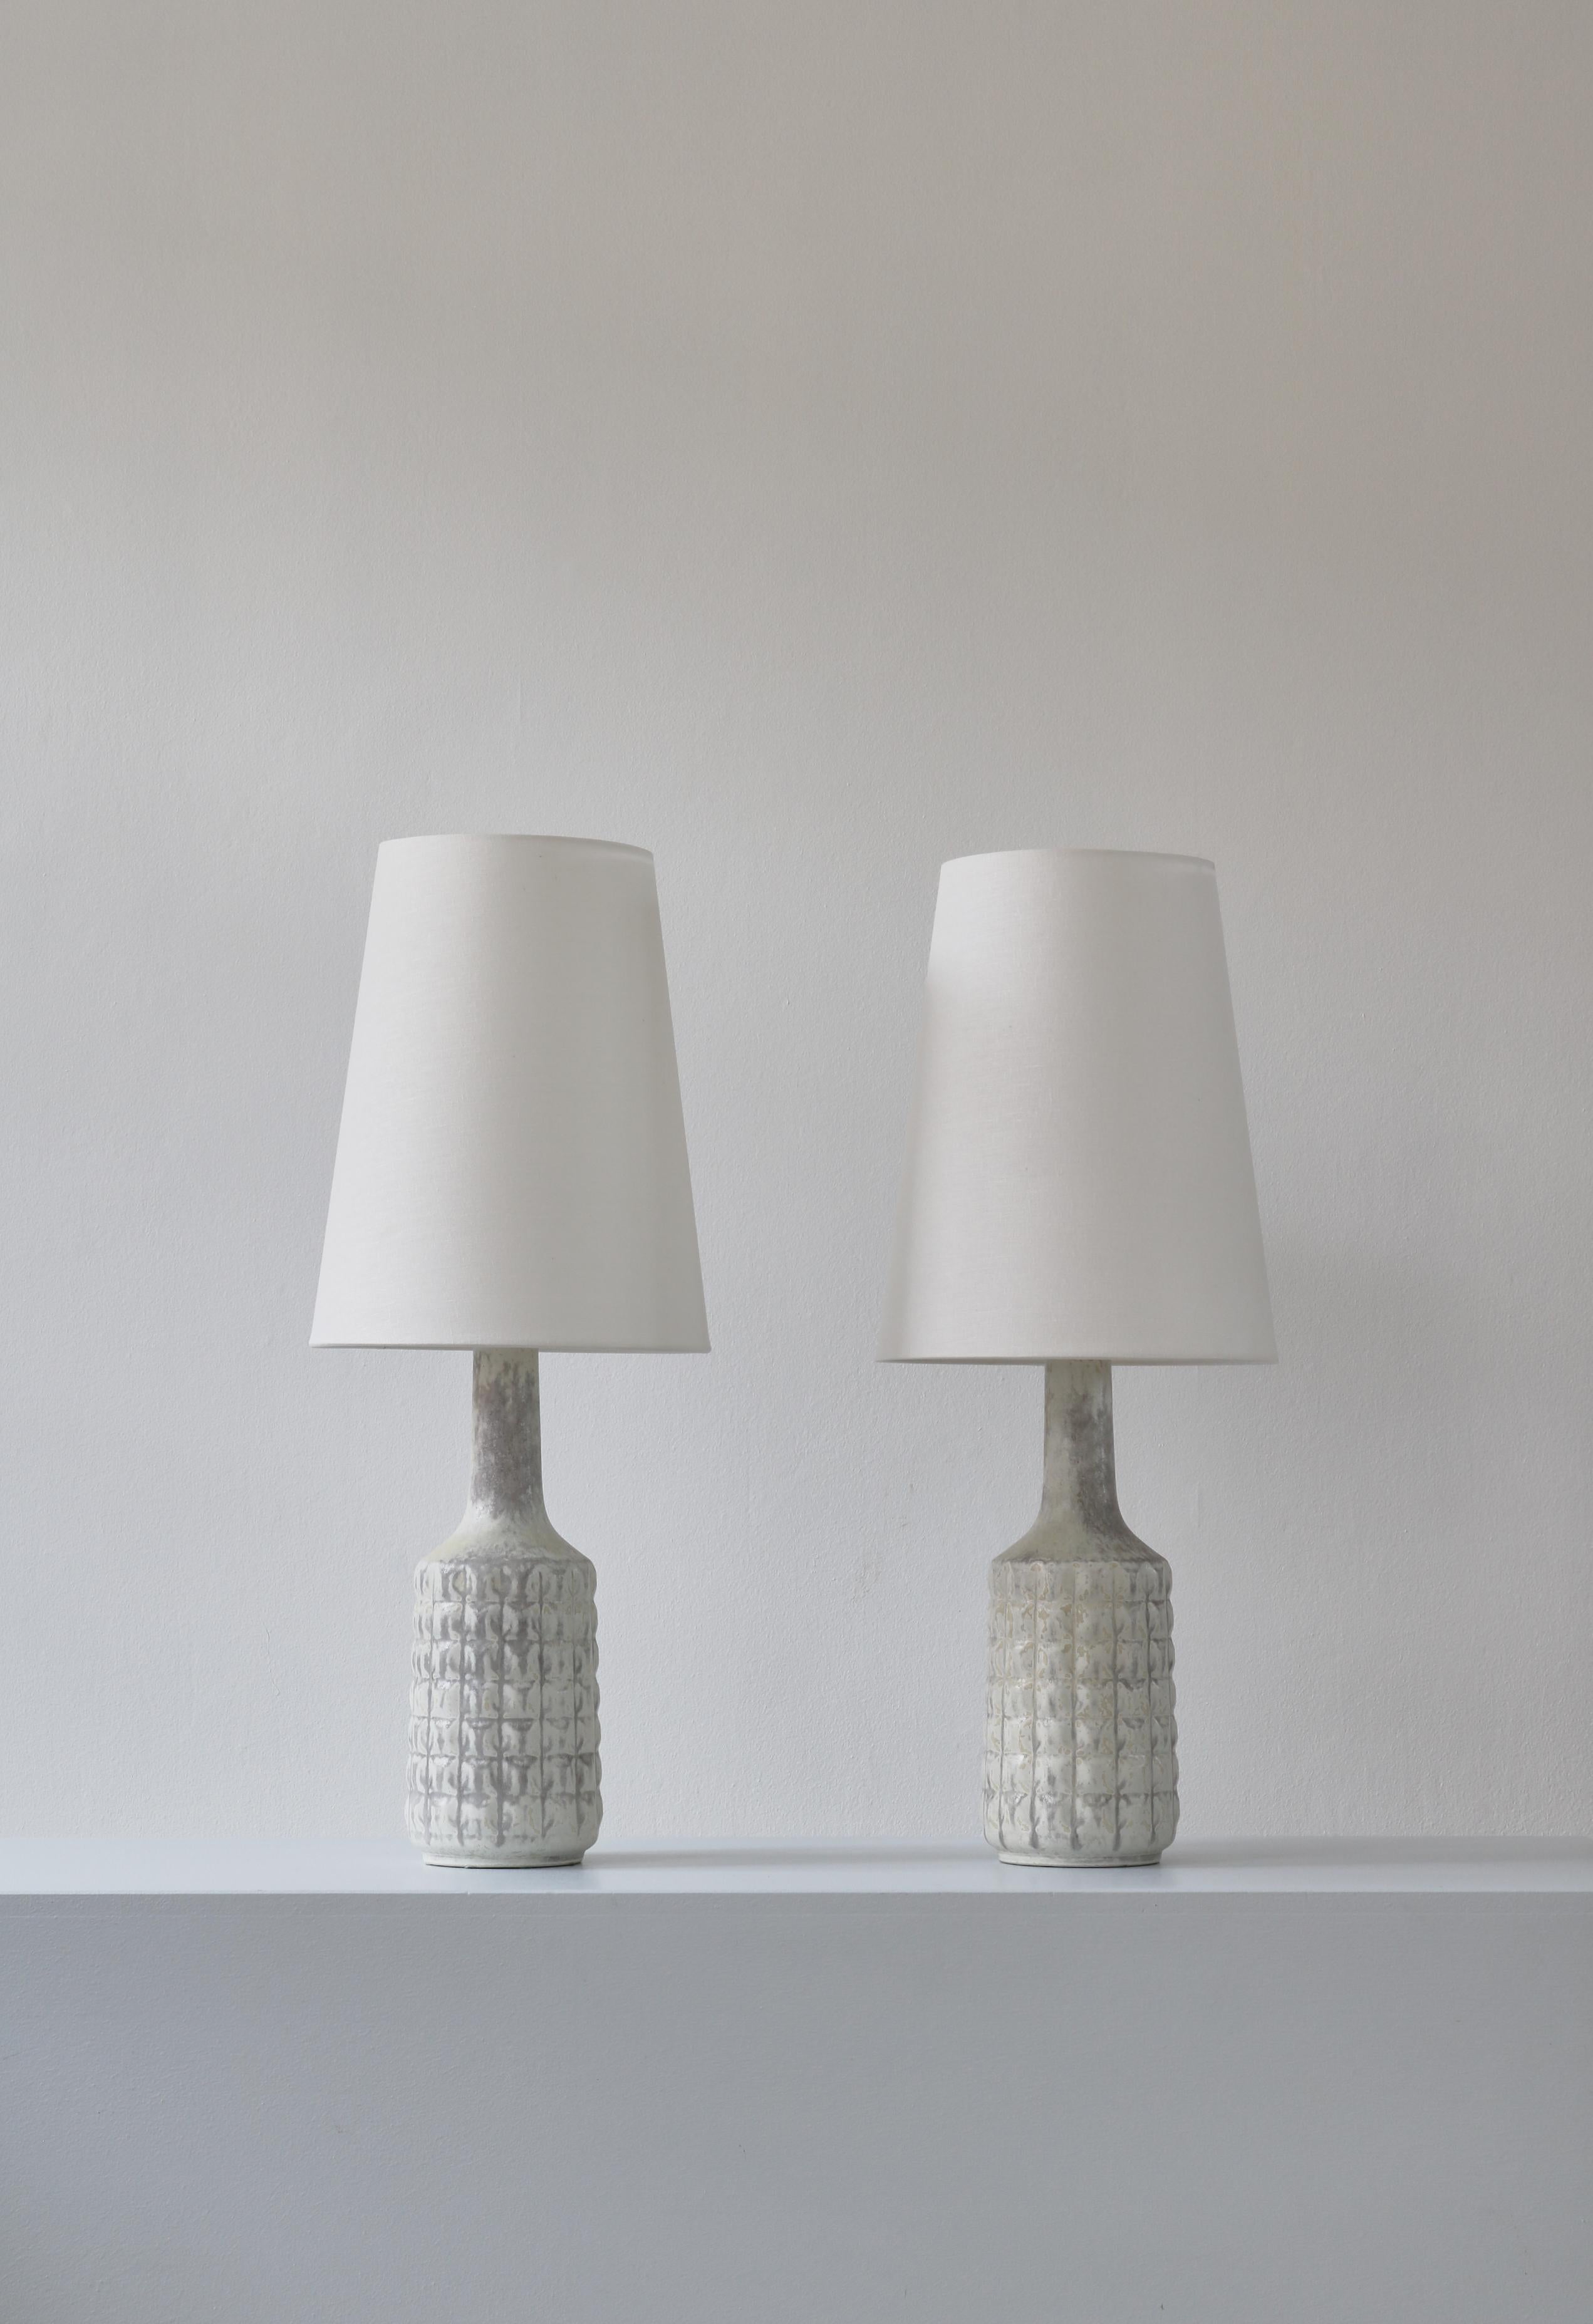 A wonderful pair of Scandinavian Modern unique table lamps made at Desiree stoneware workshop in Copenhagen in the 1960s. The lamp bases are handmade and decorated with an amazing white & grey glazing. Both lamps are signed. Equipped with white flax